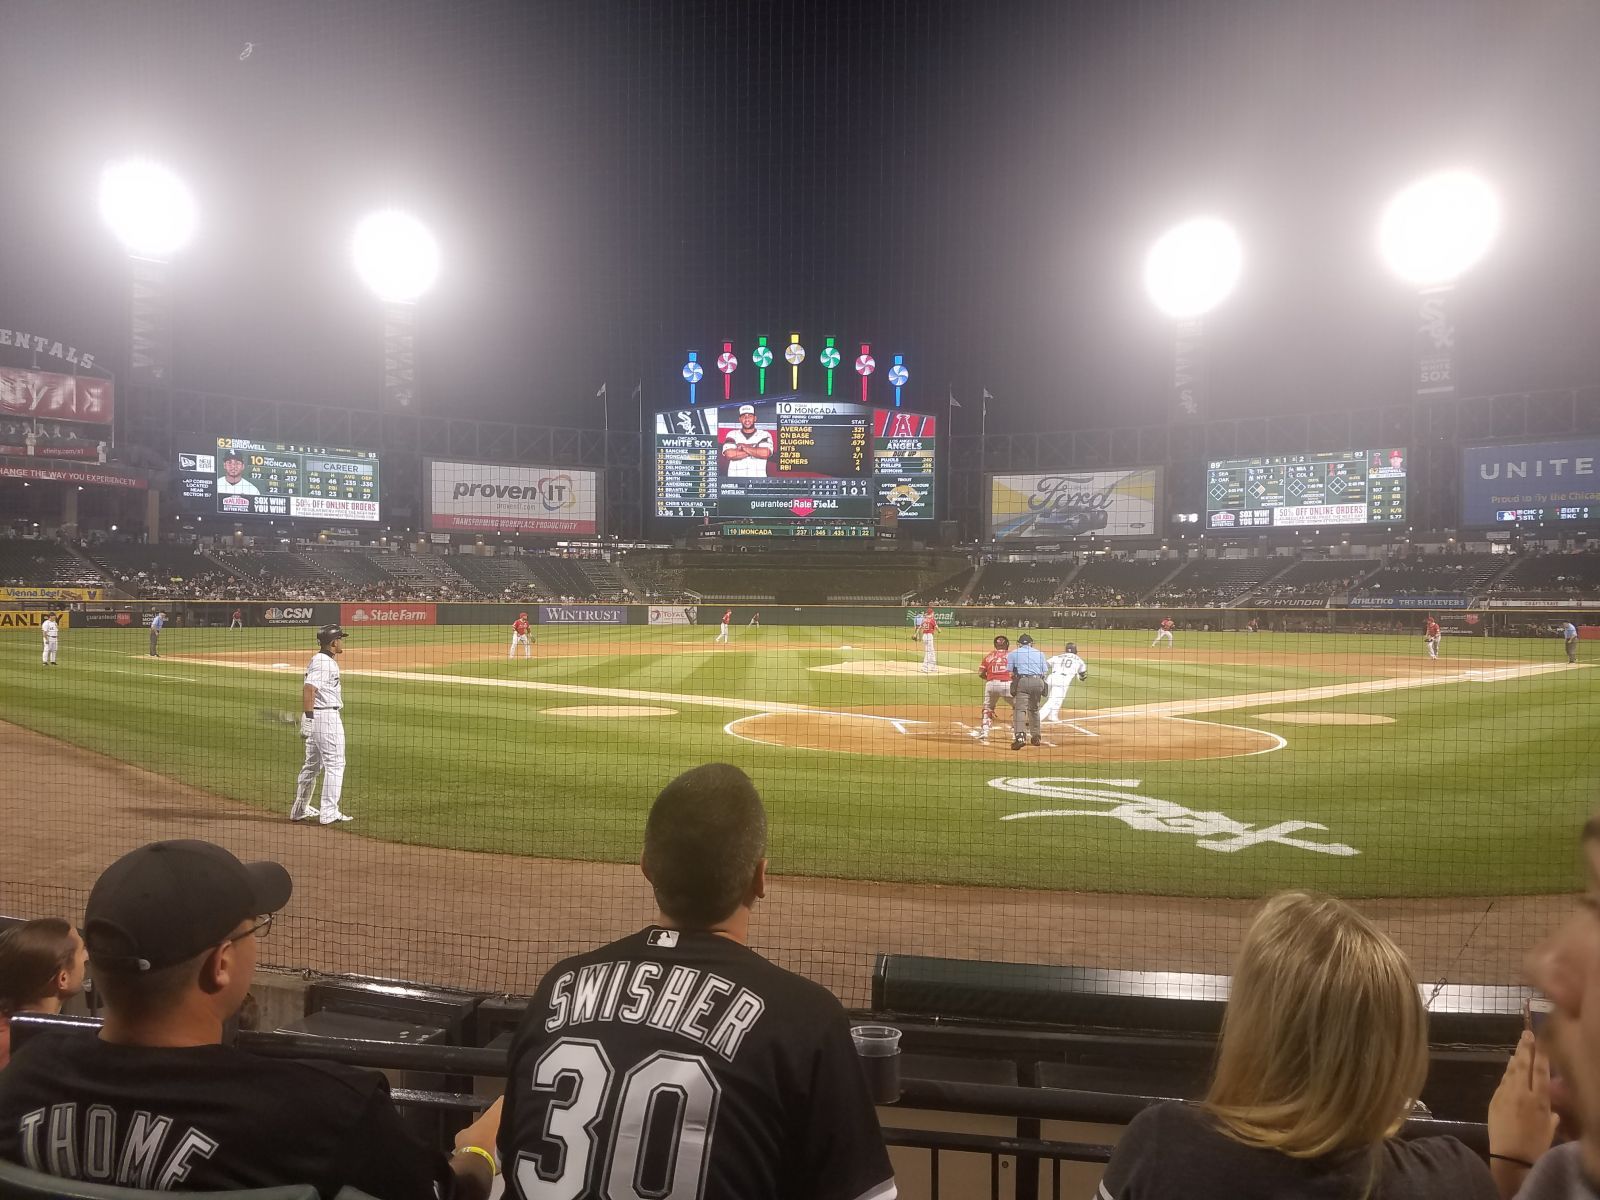 scout seats 133, row 5 seat view  - guaranteed rate field